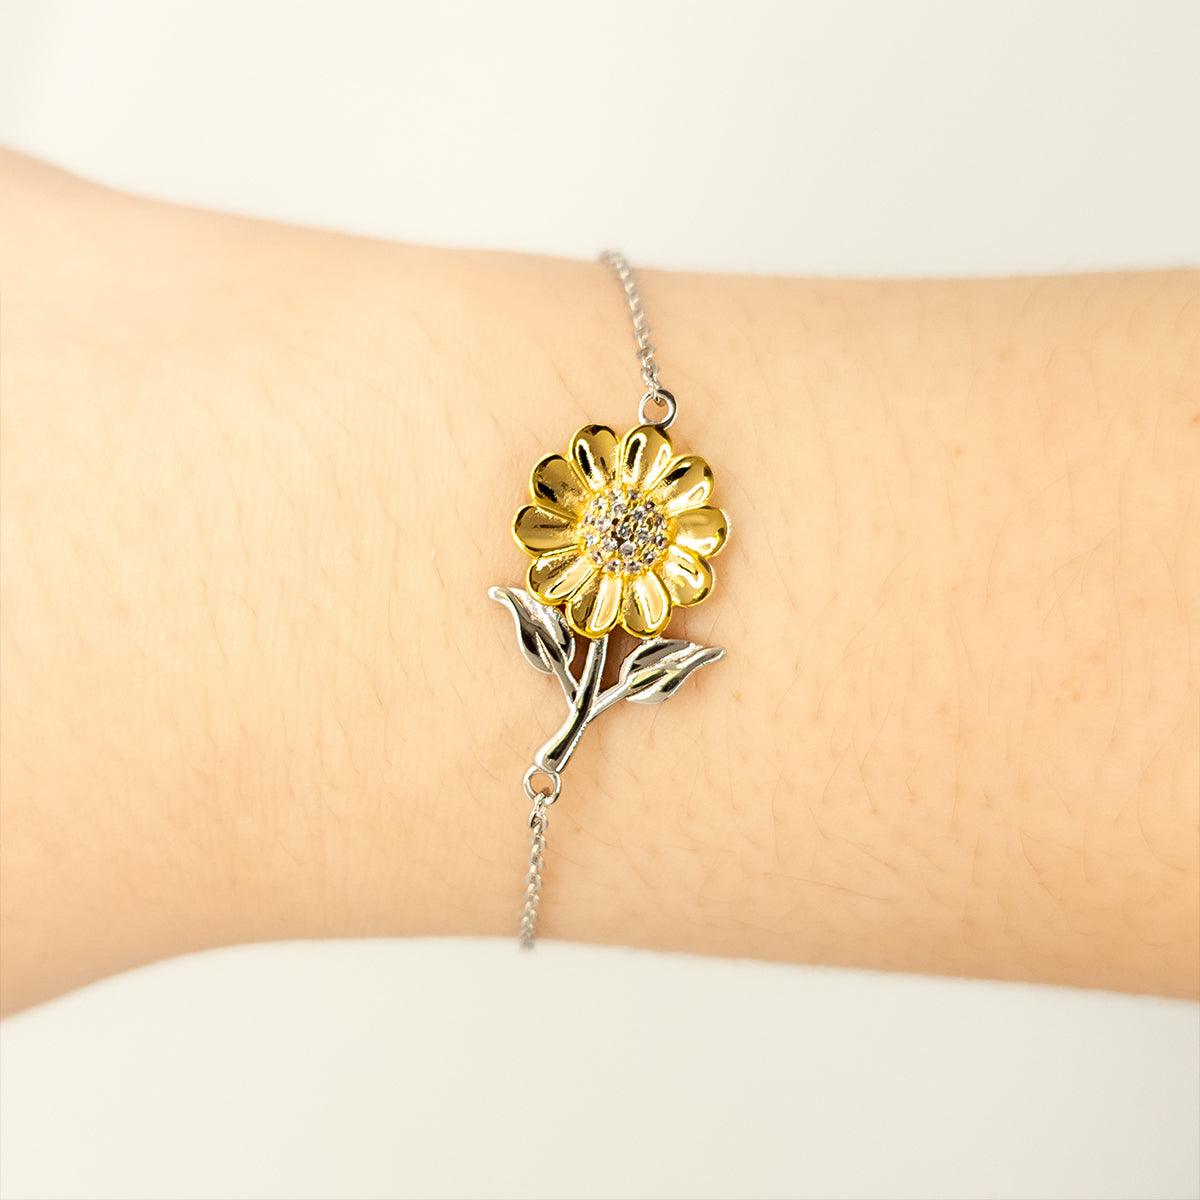 To My Grandpa Gifts, Inspirational Grandpa Sunflower Bracelet, Sentimental Birthday Christmas Unique Gifts For Grandpa Behind you, all your memories, before you, all your dreams, around you, all who love you, within you, all you need - Mallard Moon Gift Shop